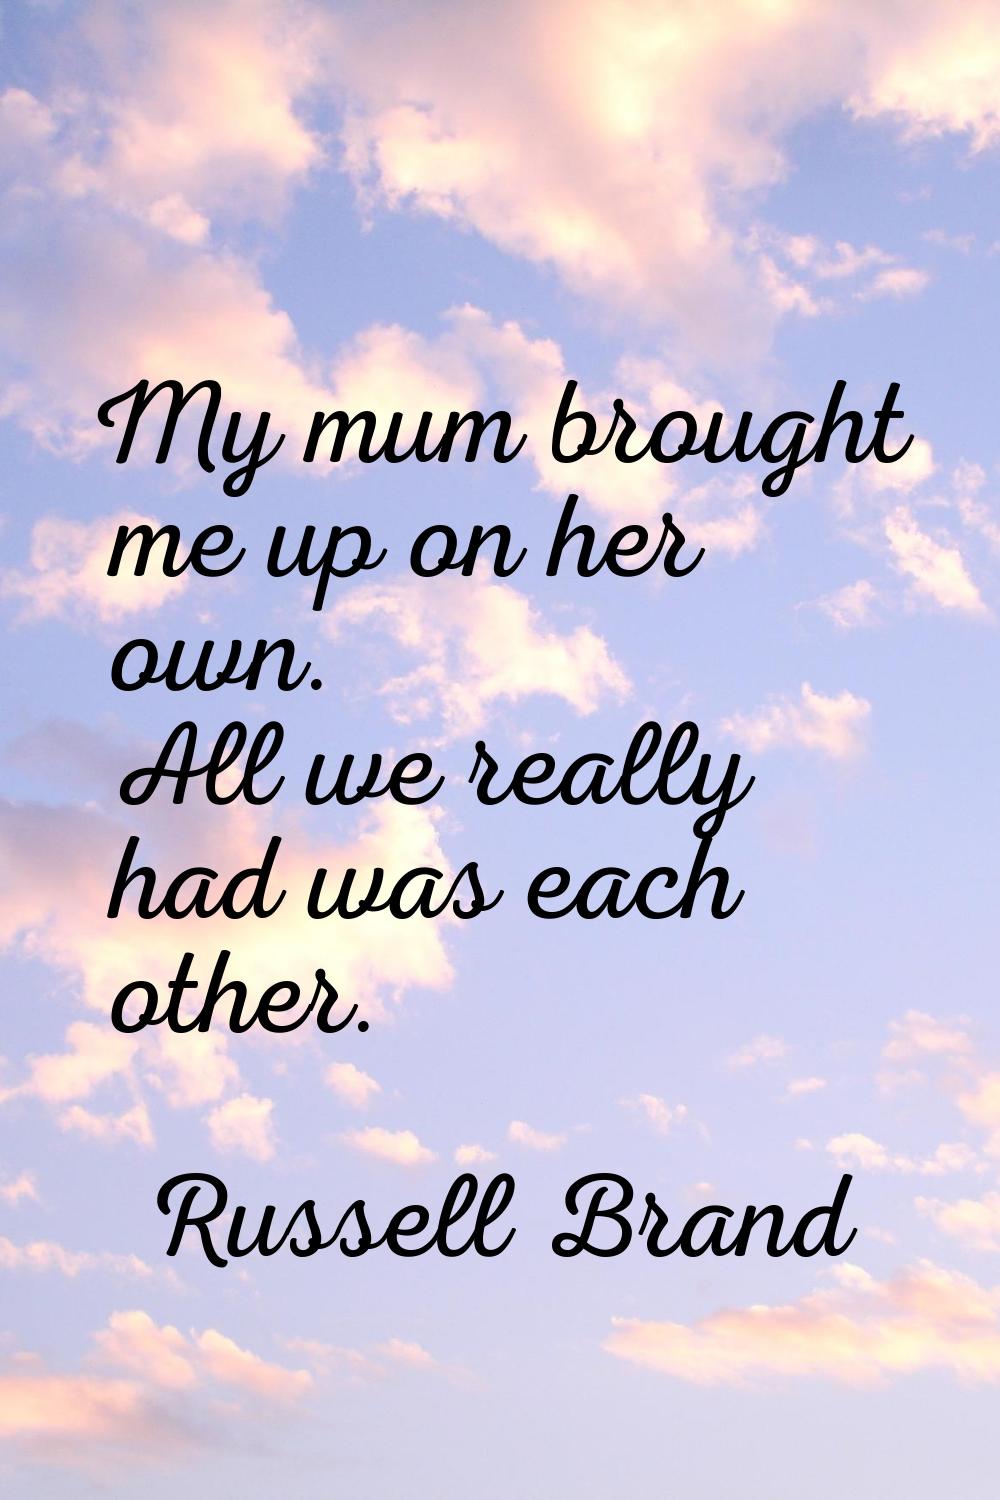 My mum brought me up on her own. All we really had was each other.